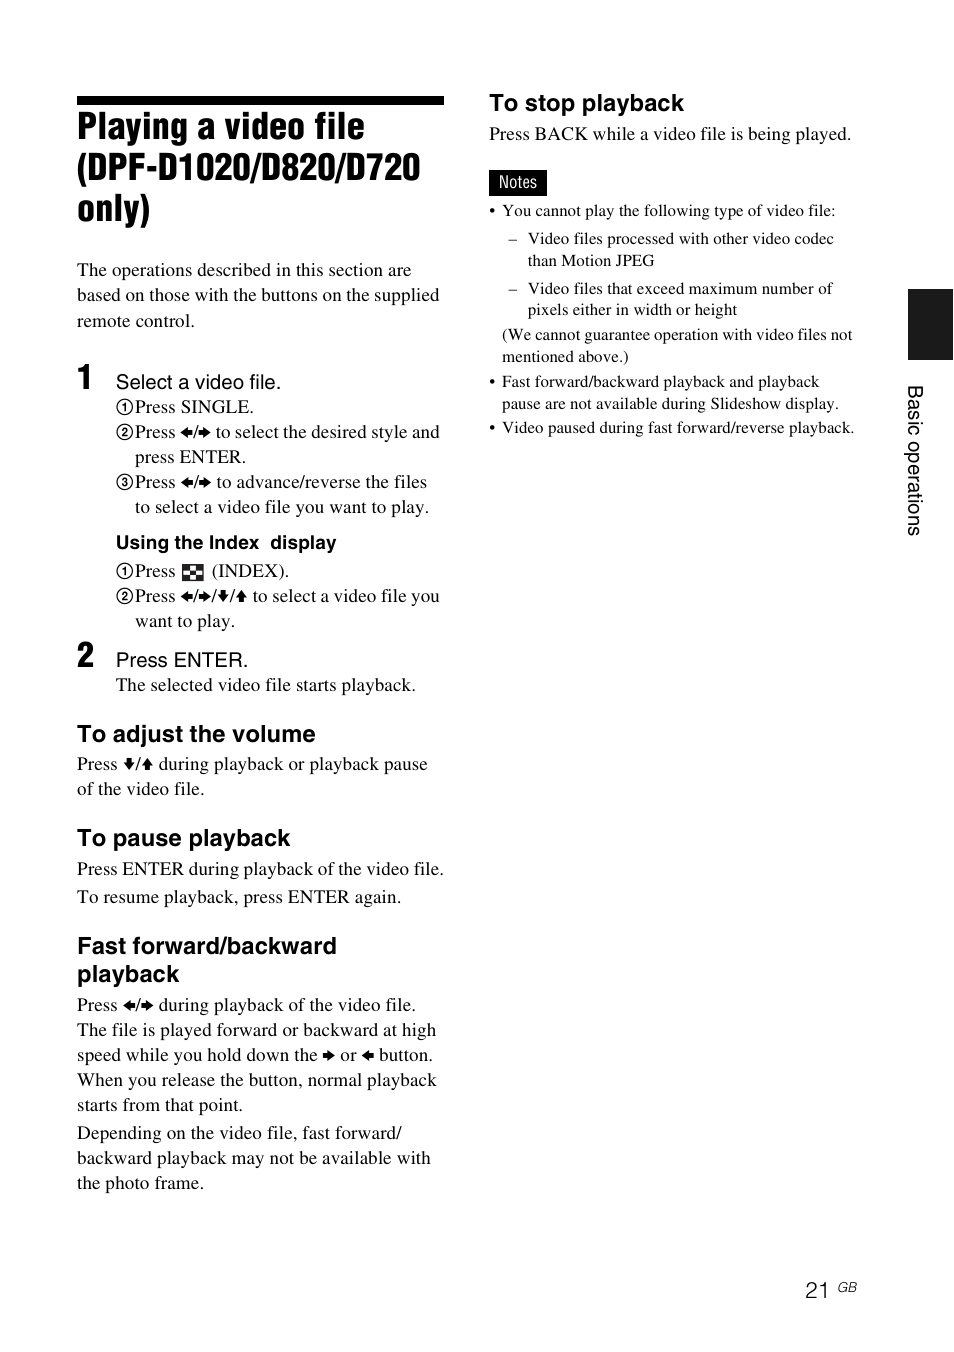 Playing a video file (dpf-d1020/d820/d720 only), Playing a video file (dpf-d1020/ d820/d720 only), Fast forward/backward playback | Sony DPF-D1010 User Manual | Page 21 / 55